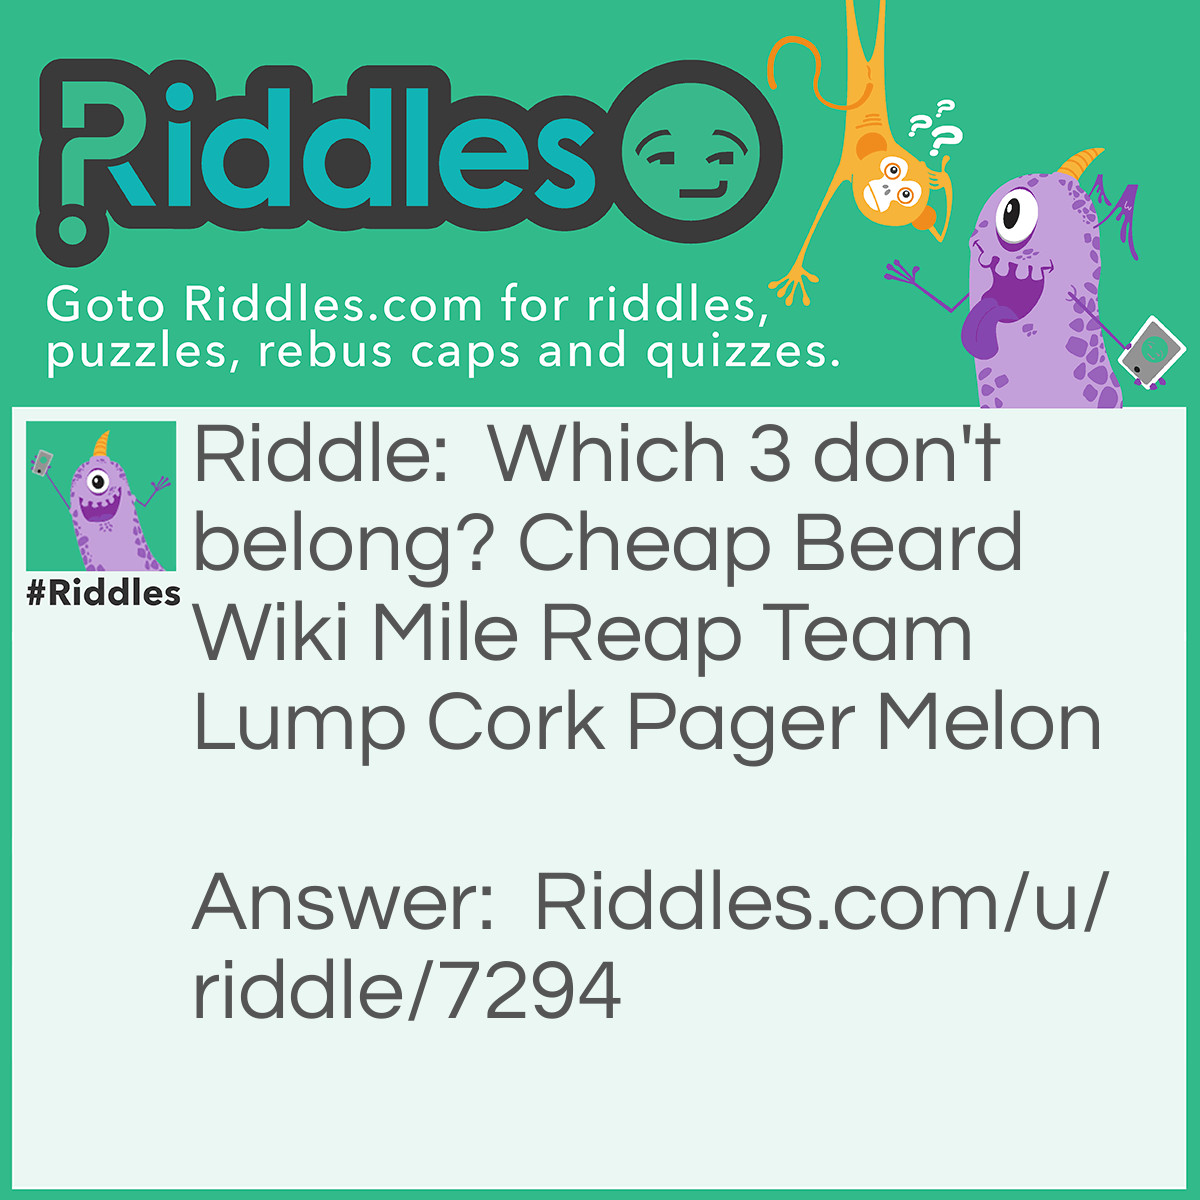 Riddle: Which 3 don't belong? Cheap Beard Wiki Mile Reap Team Lump Cork Pager Melon Answer: Beard, team, and cork. All the other words are <a href="/quiz/21-anagrams">anagrams</a> of fruit, while beard team and cork rearrange into bread, meat, and rock. Those would make an amazing sandwich.